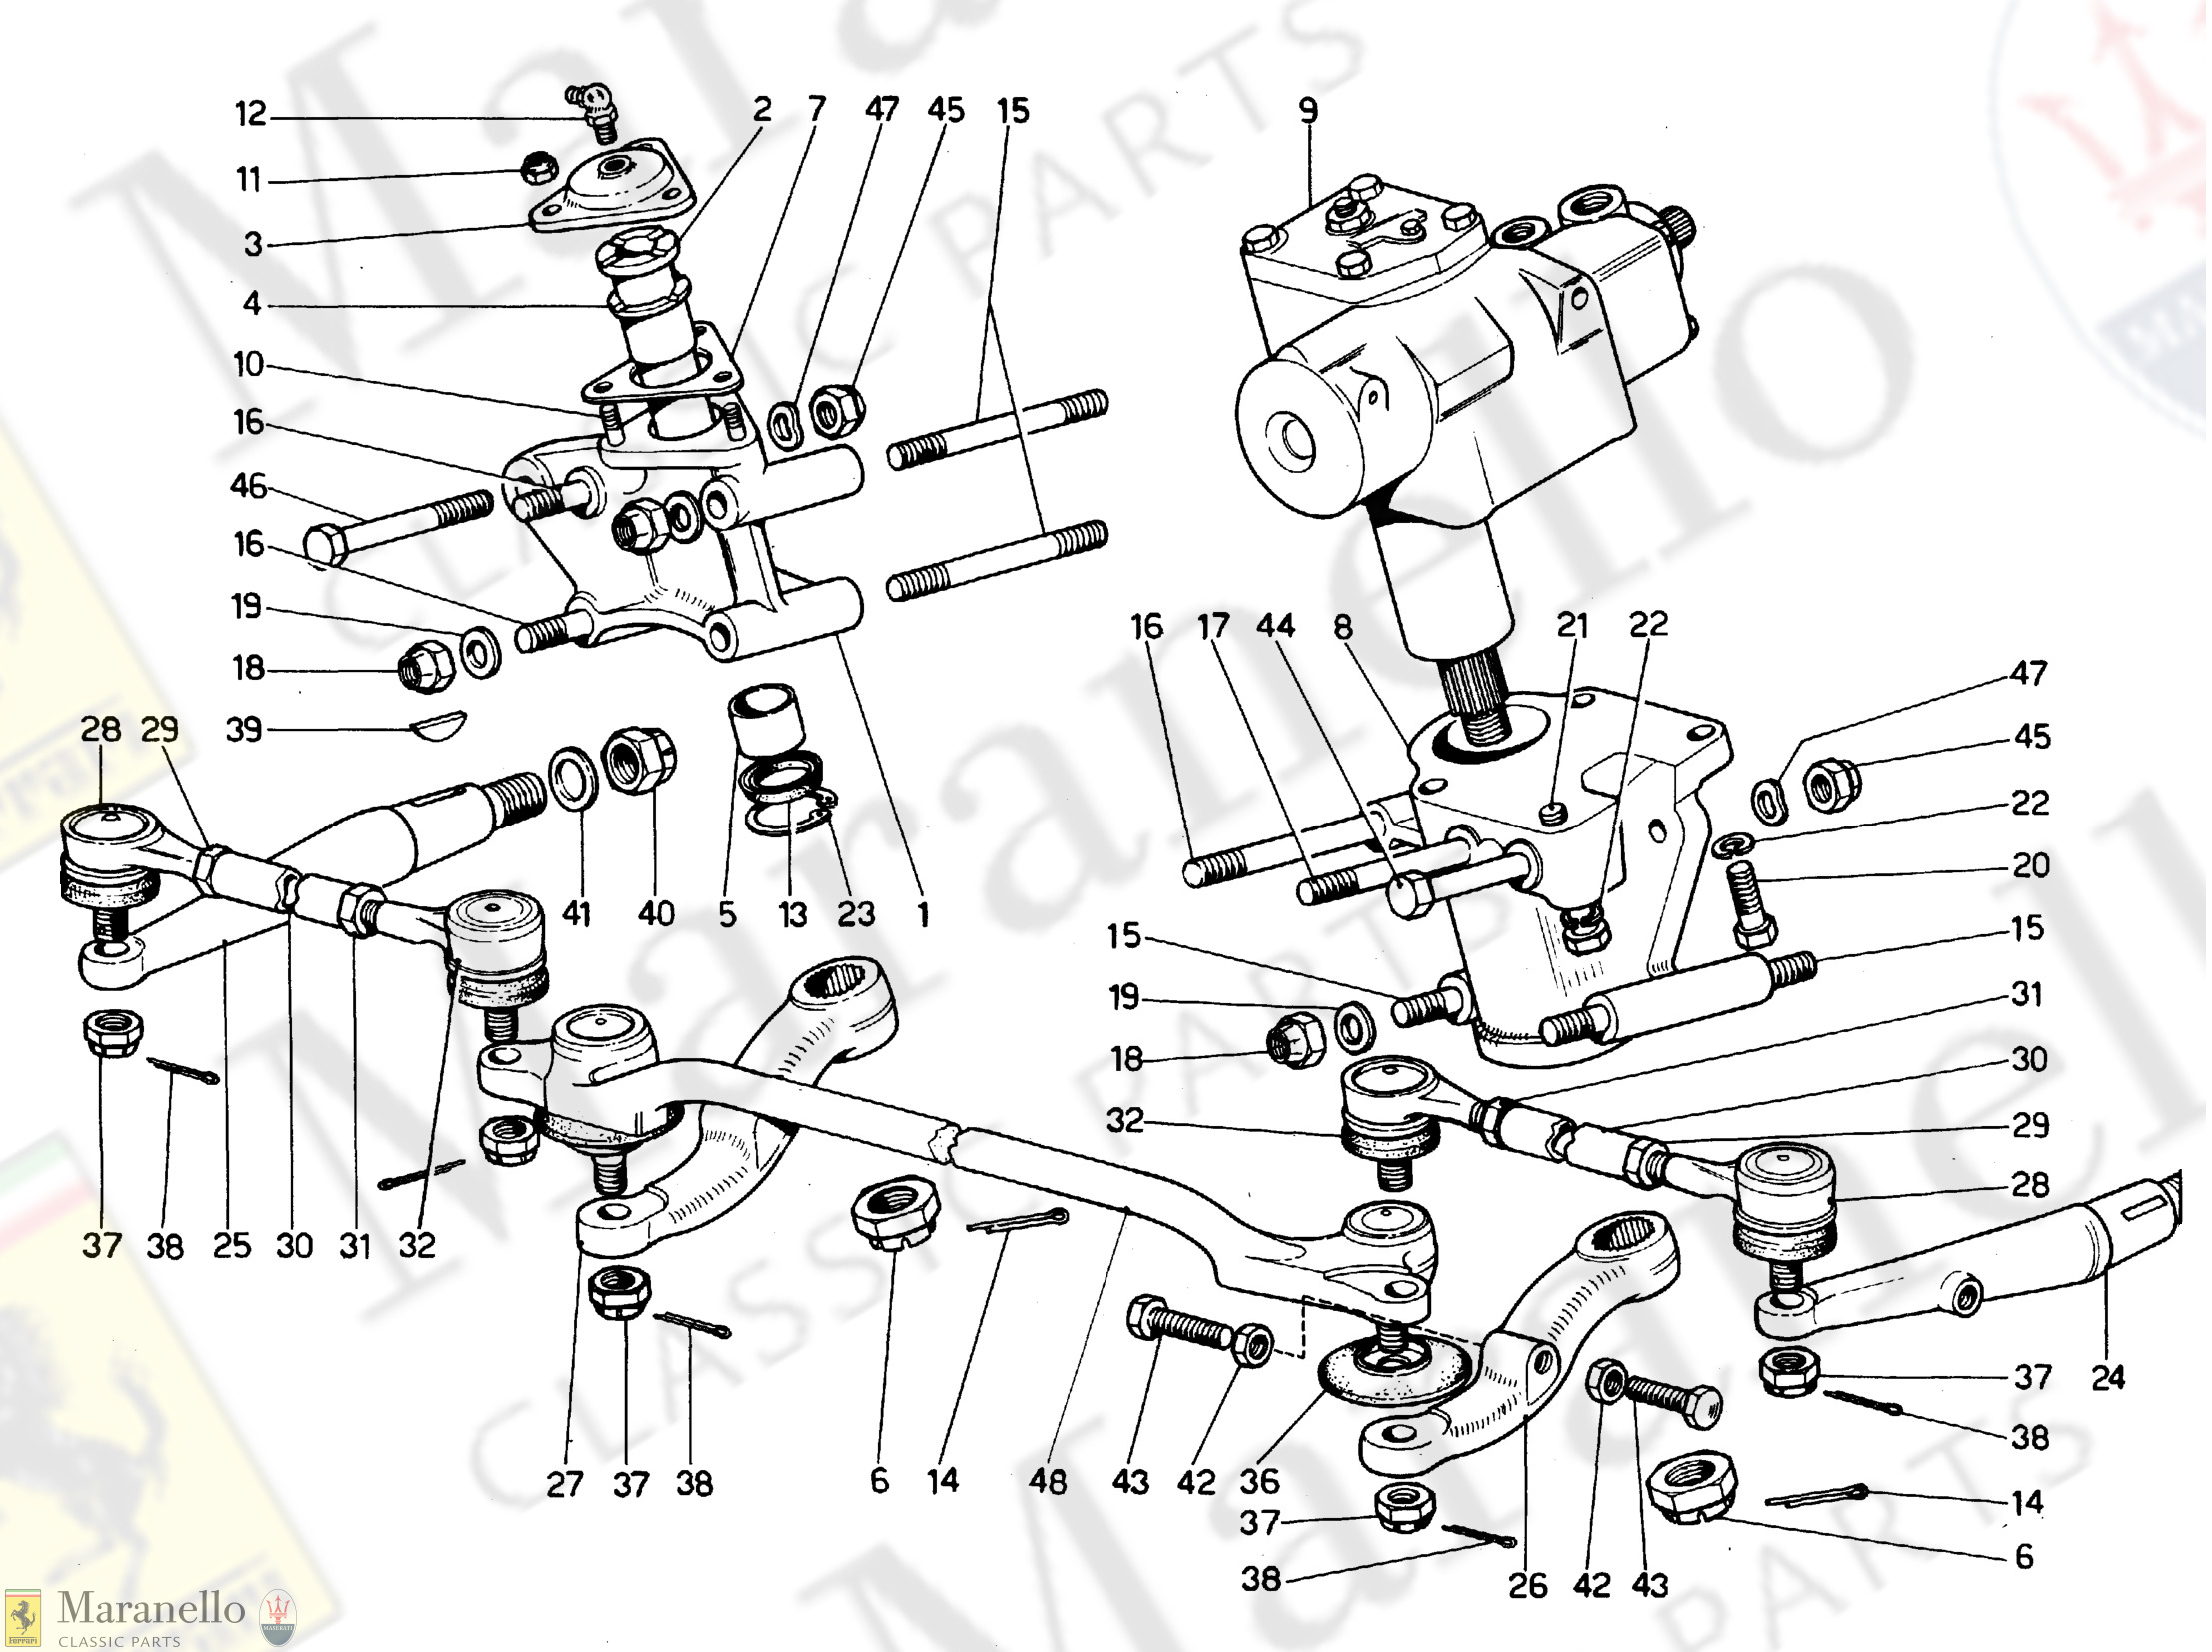 034A - Steering Linkage - Revision Oct 1972